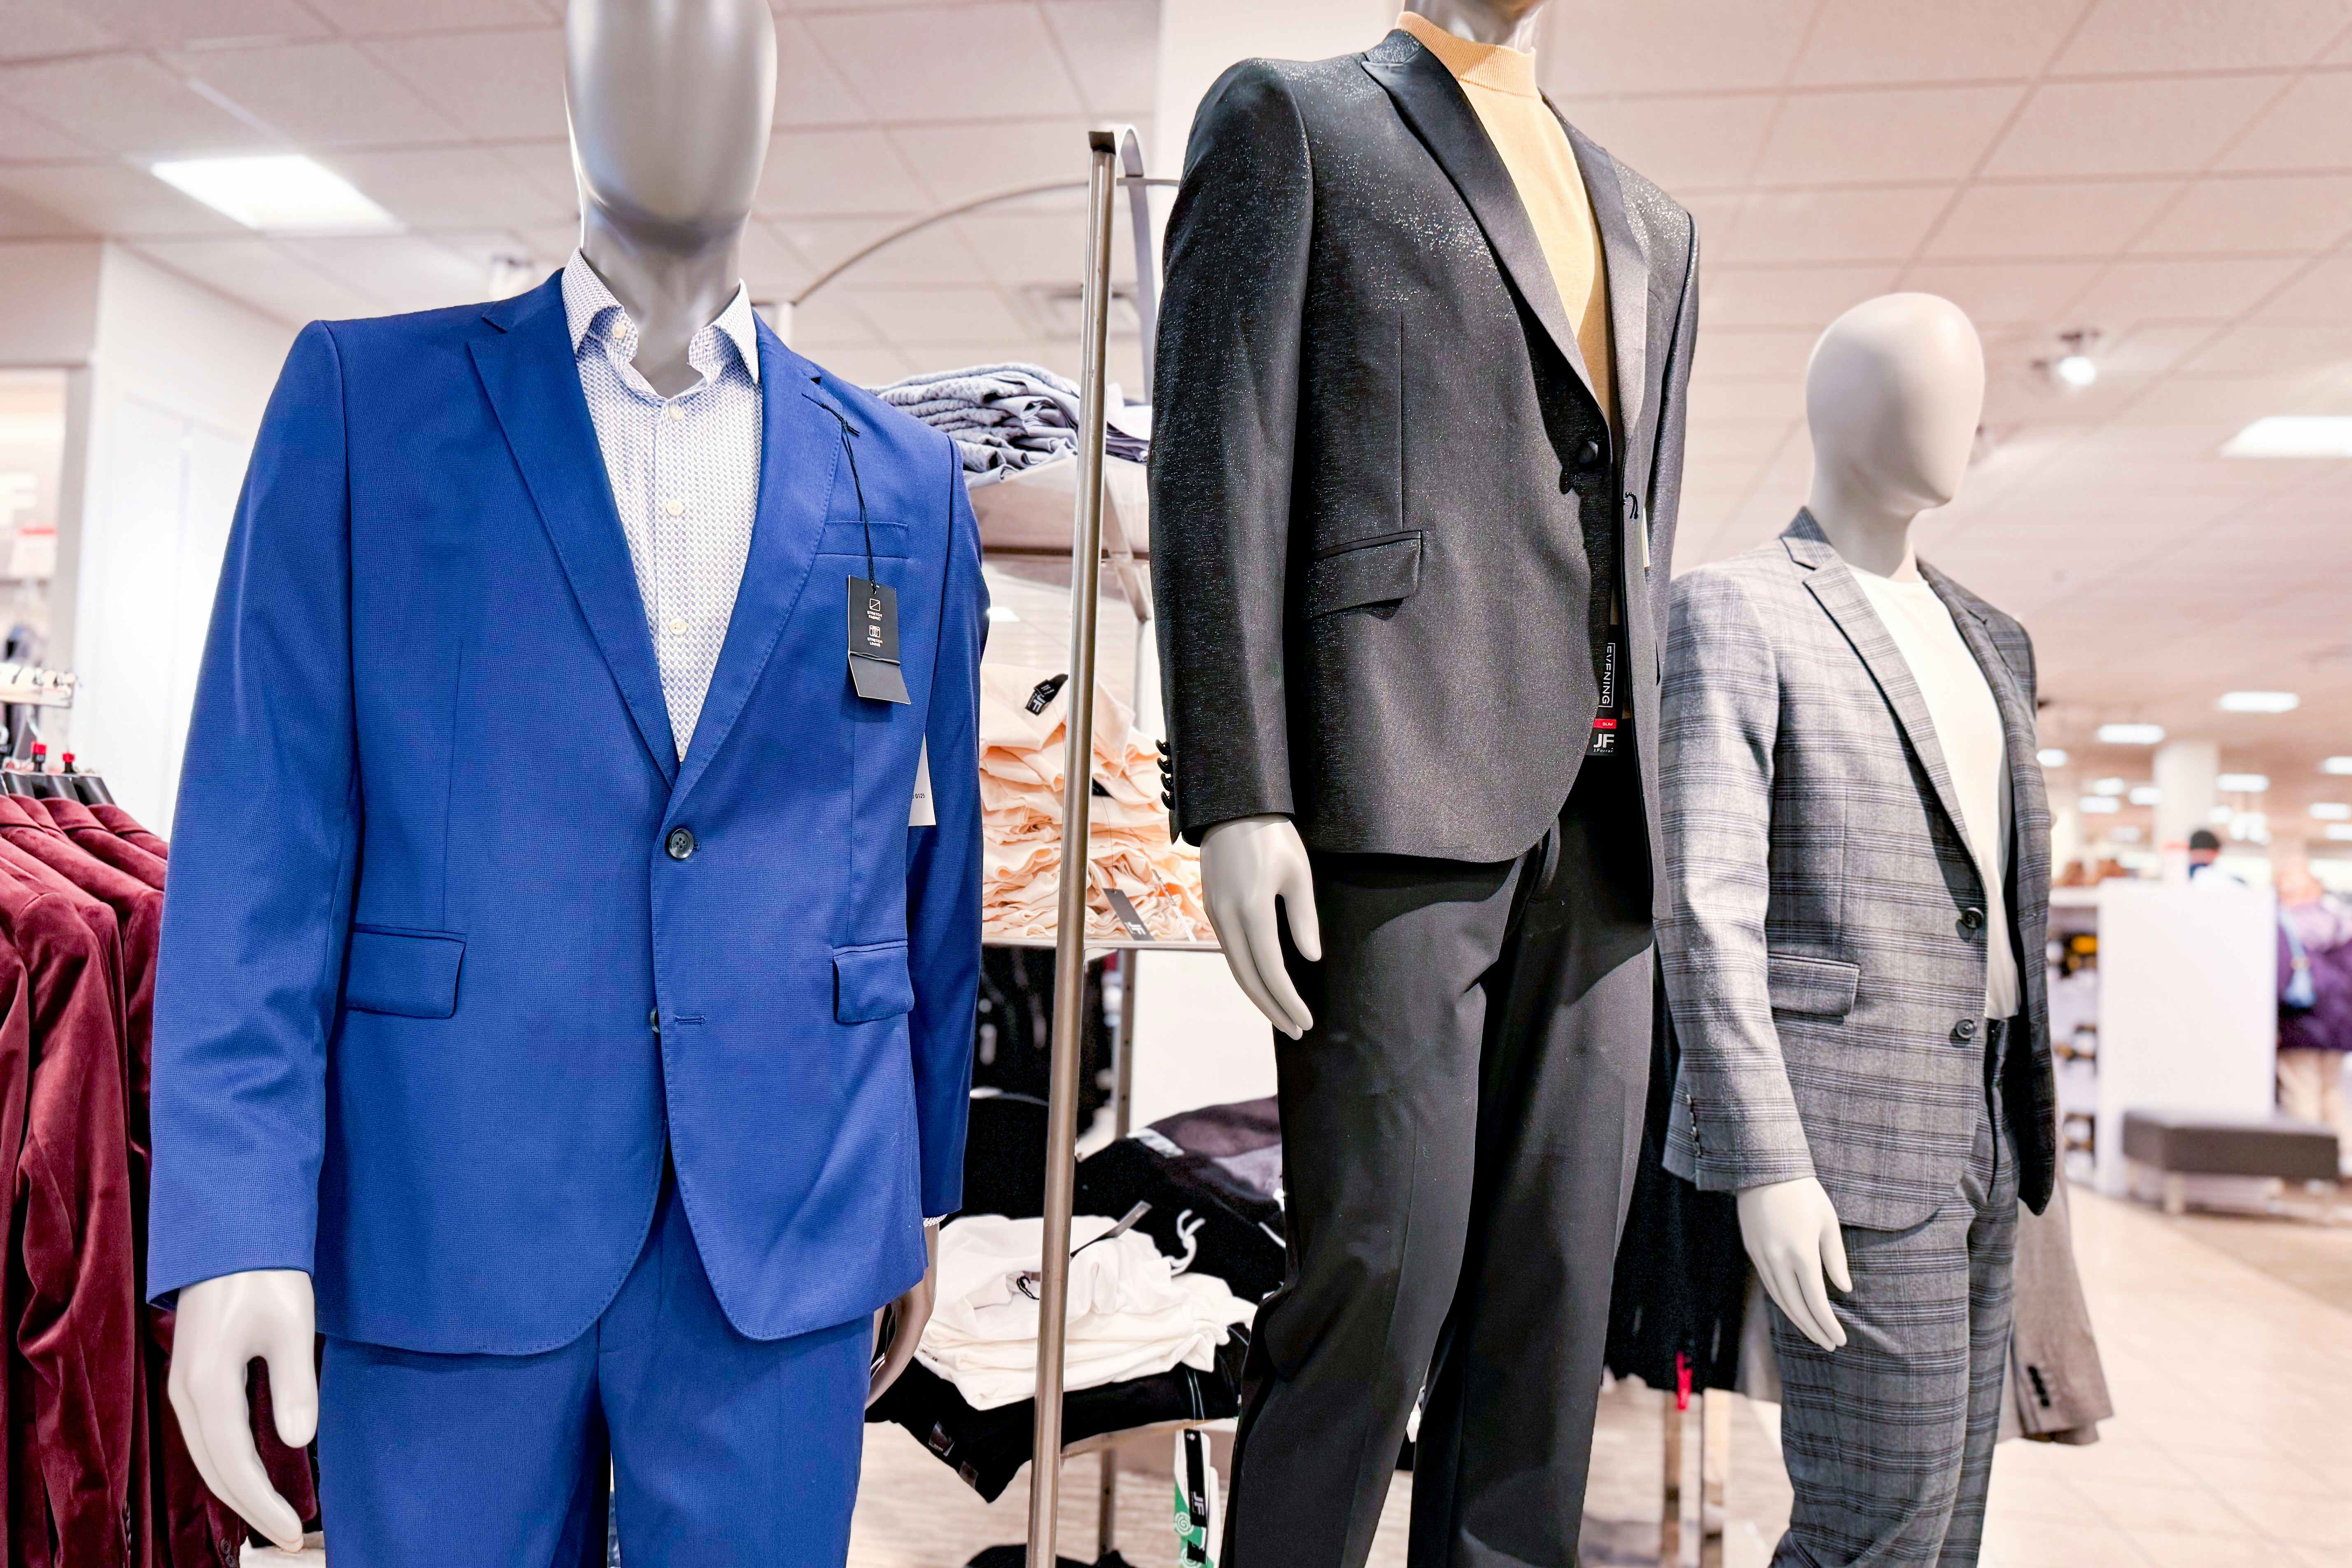 These $395 Nautica 2-Piece Suits Are as Low as $100 Right Now at Macy's